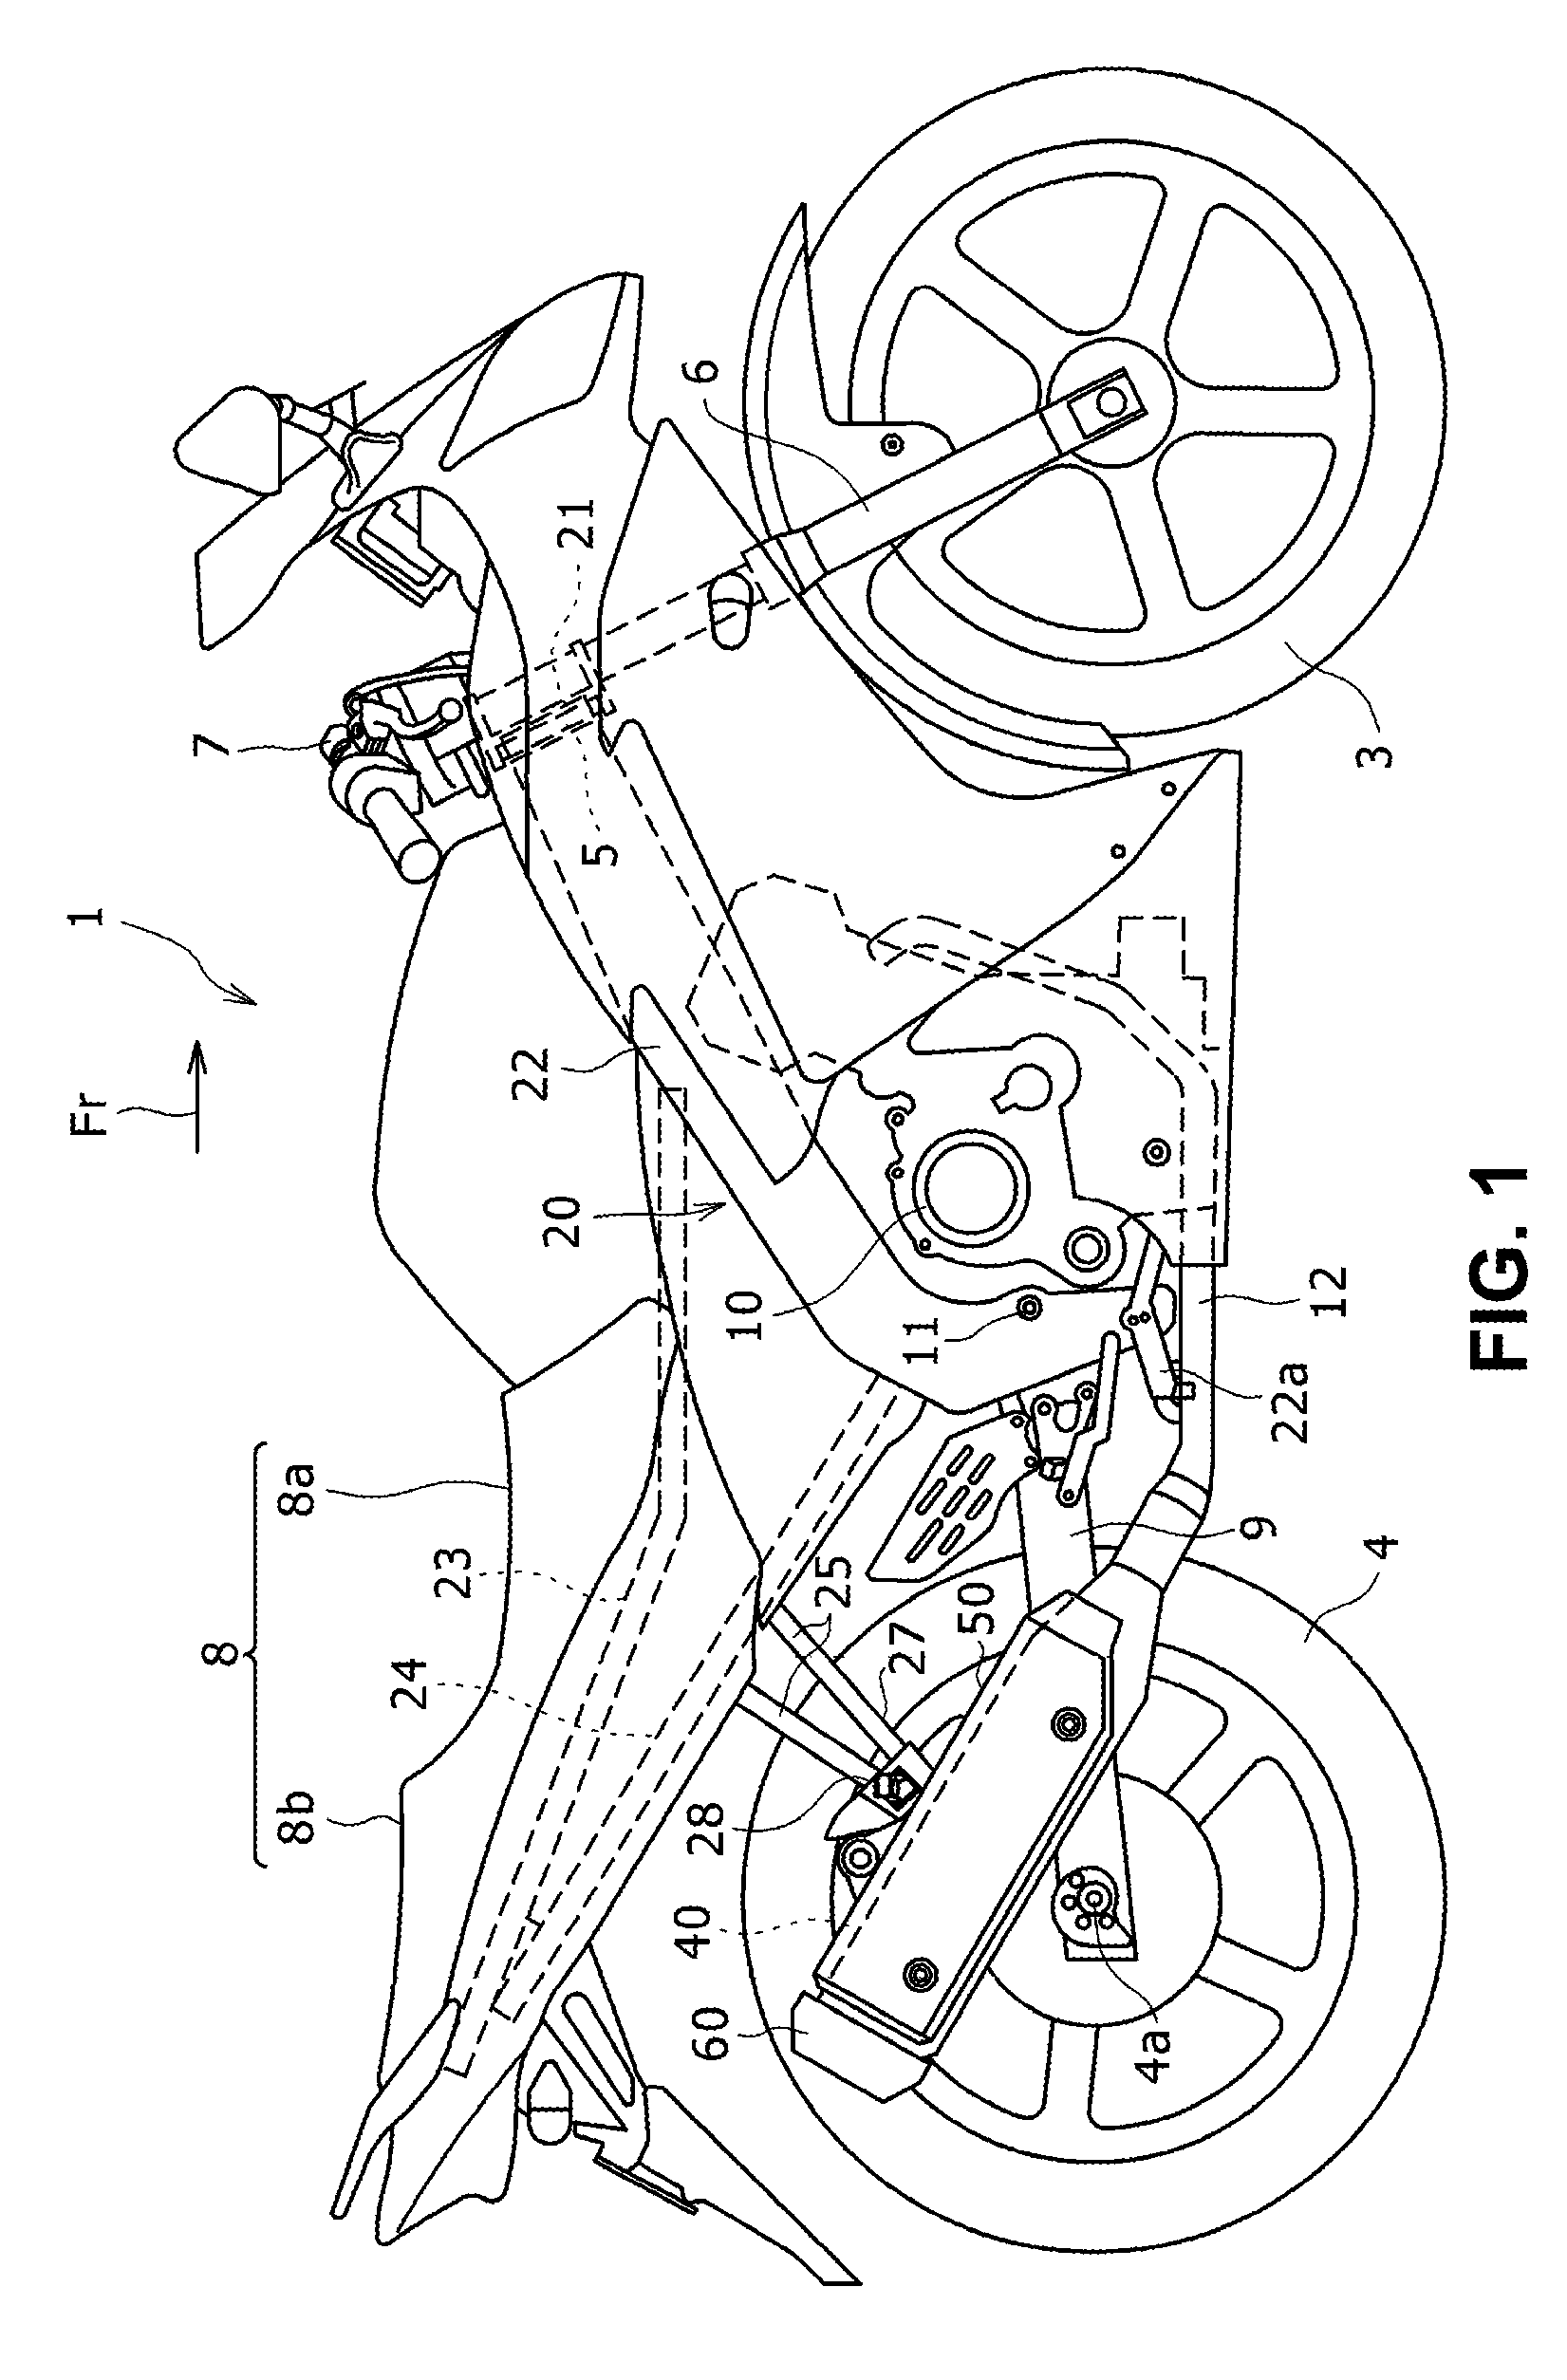 Motorcycle and muffler structure